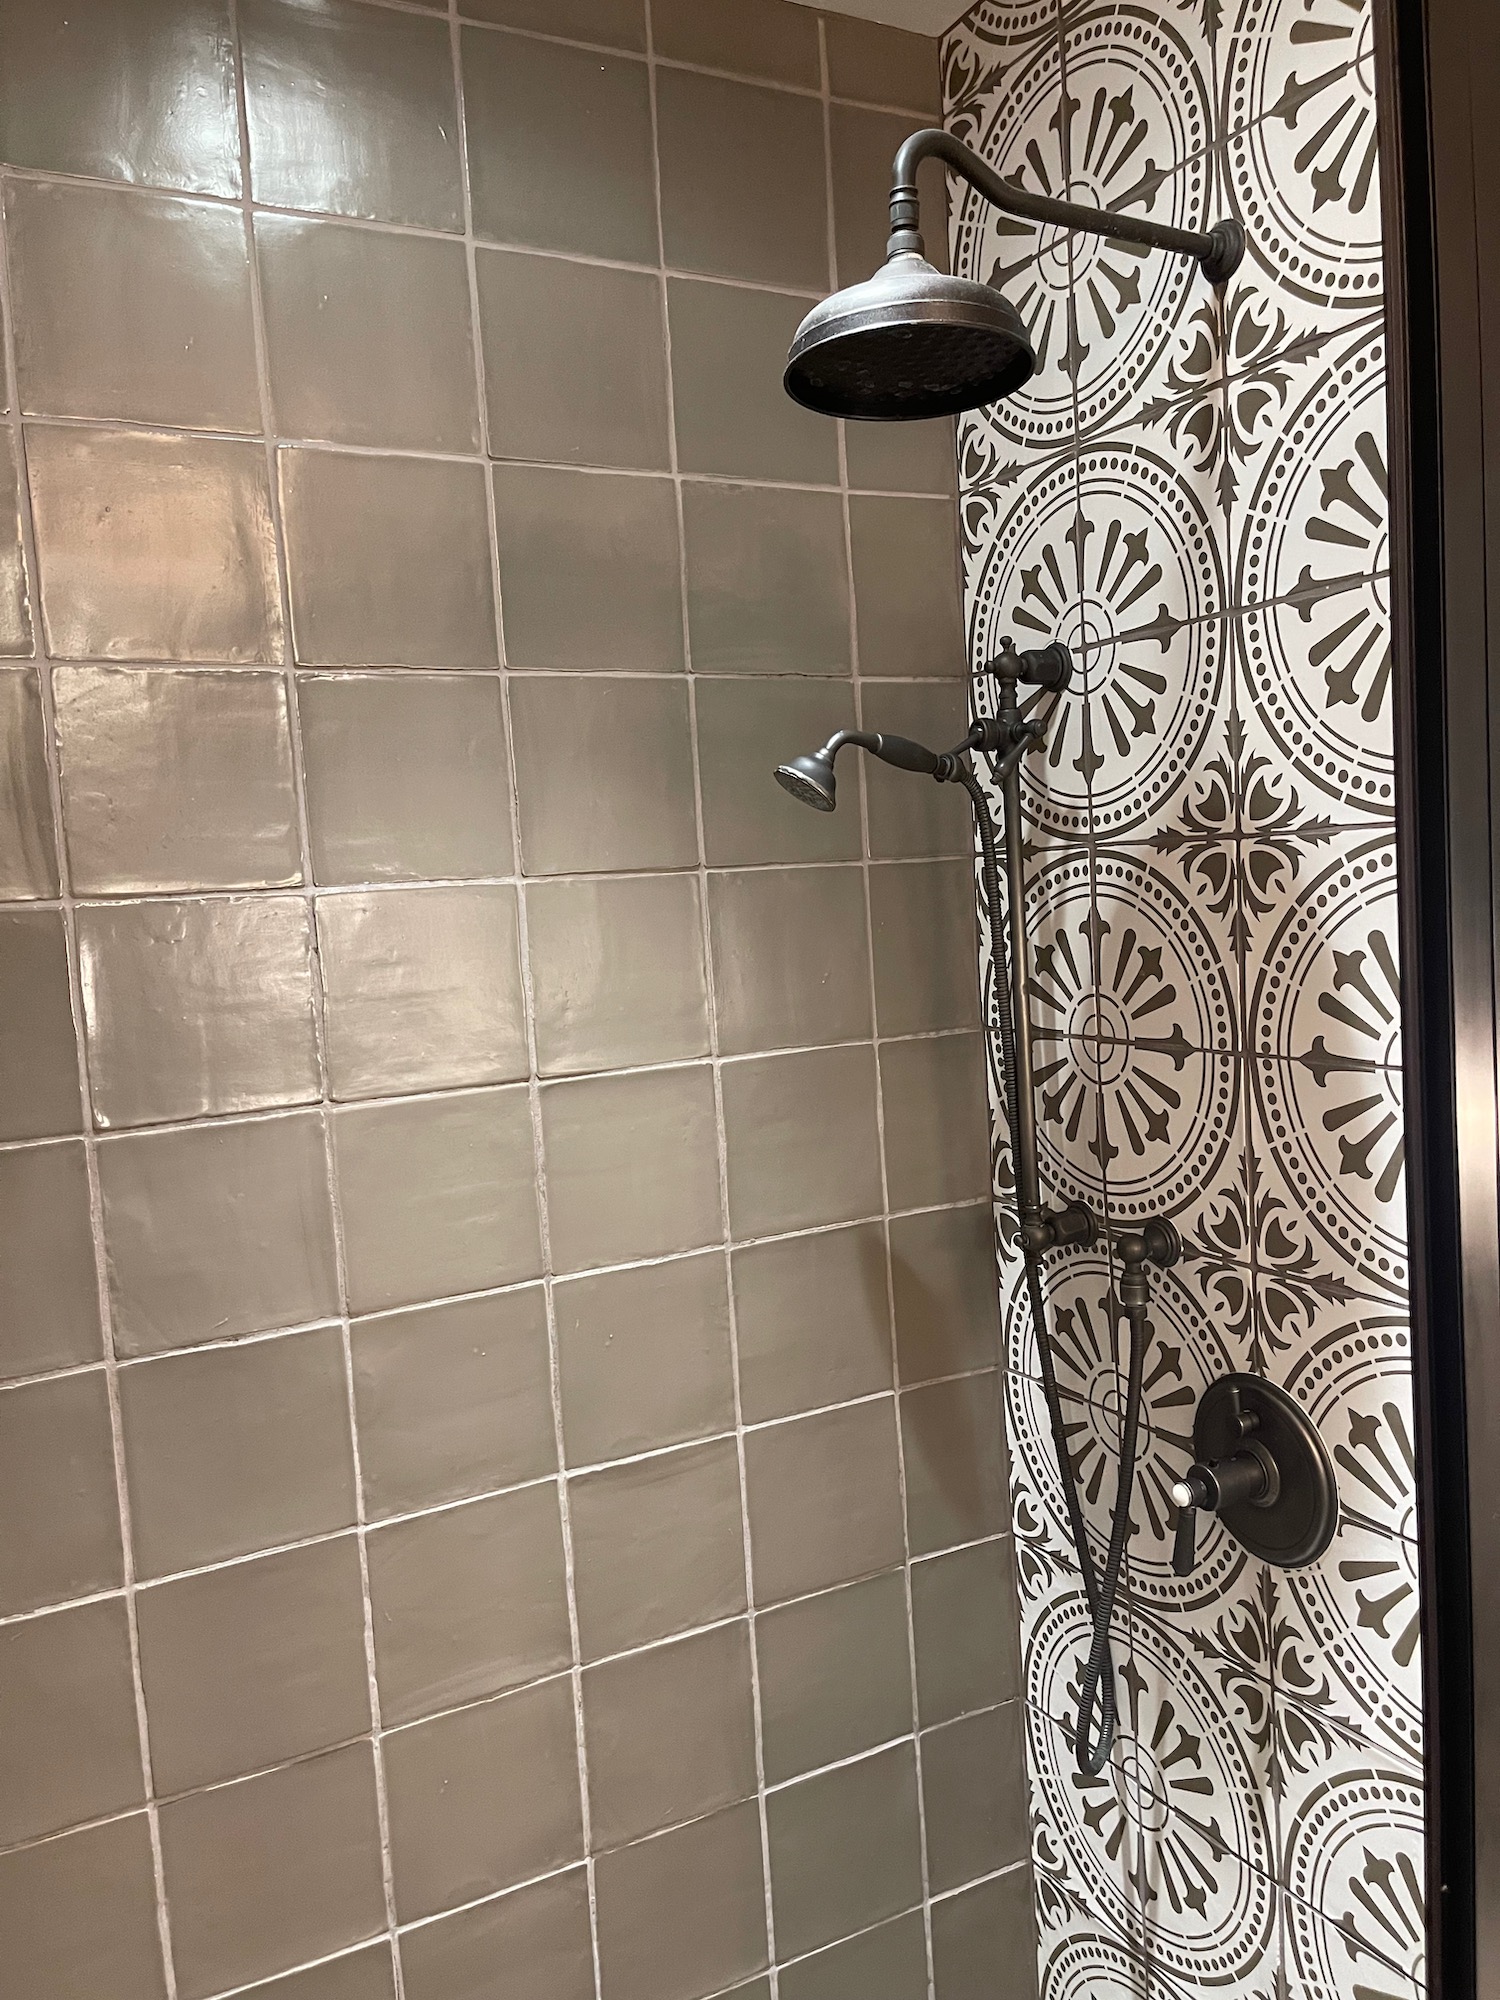 a shower head and shower head in a bathroom